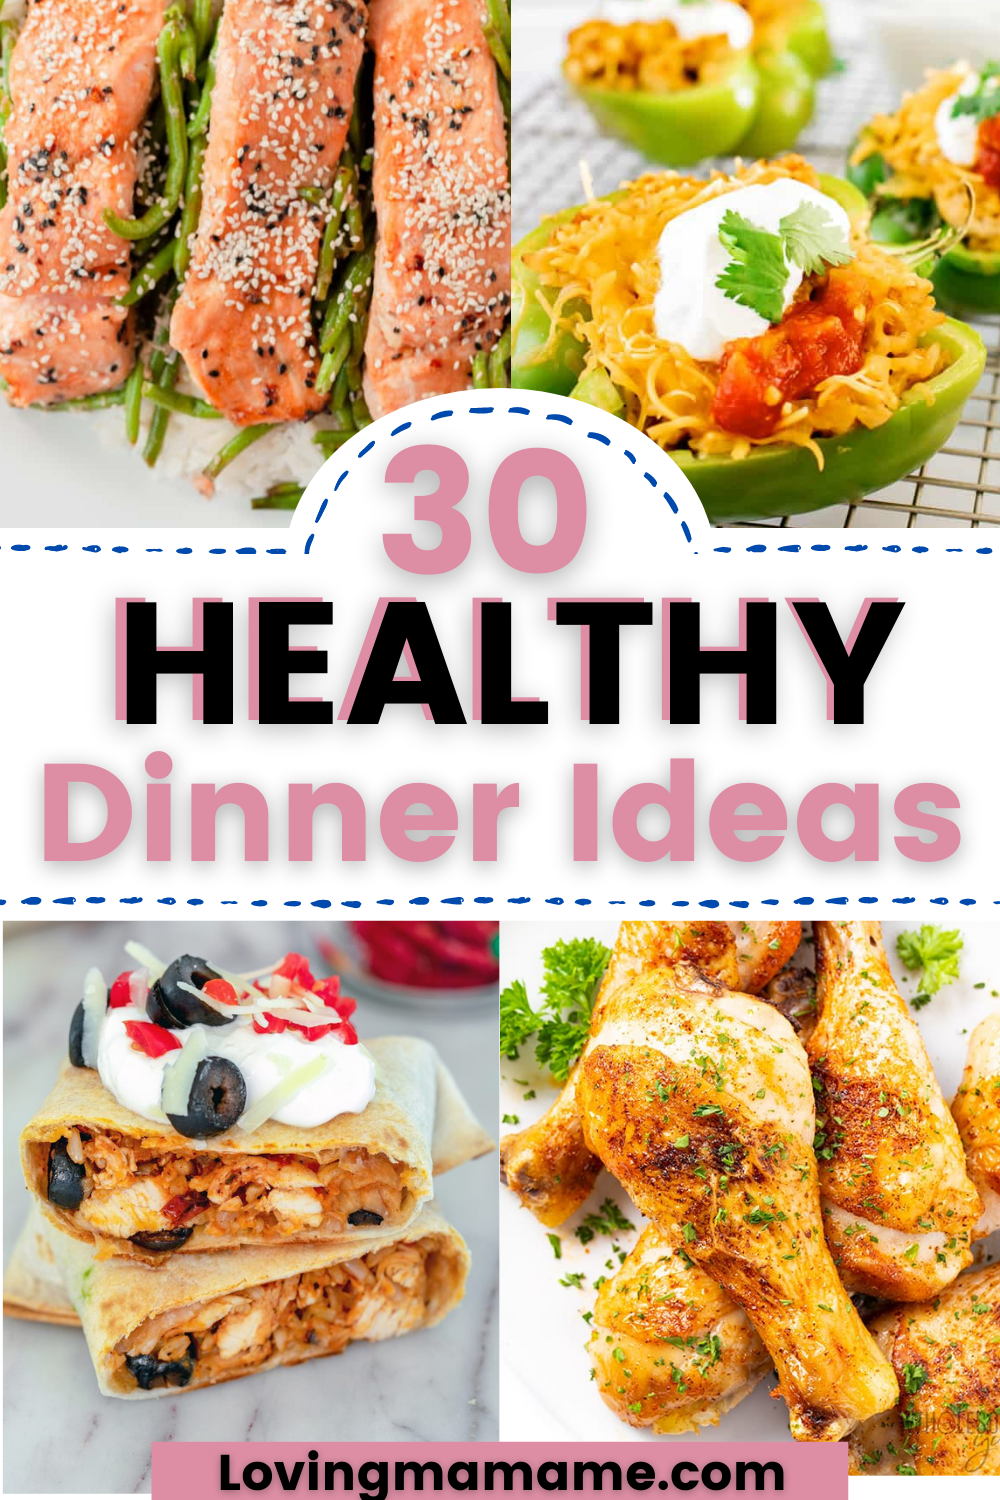 30 Healthy Dinner Ideas to Jumpstart Your New Years Diet